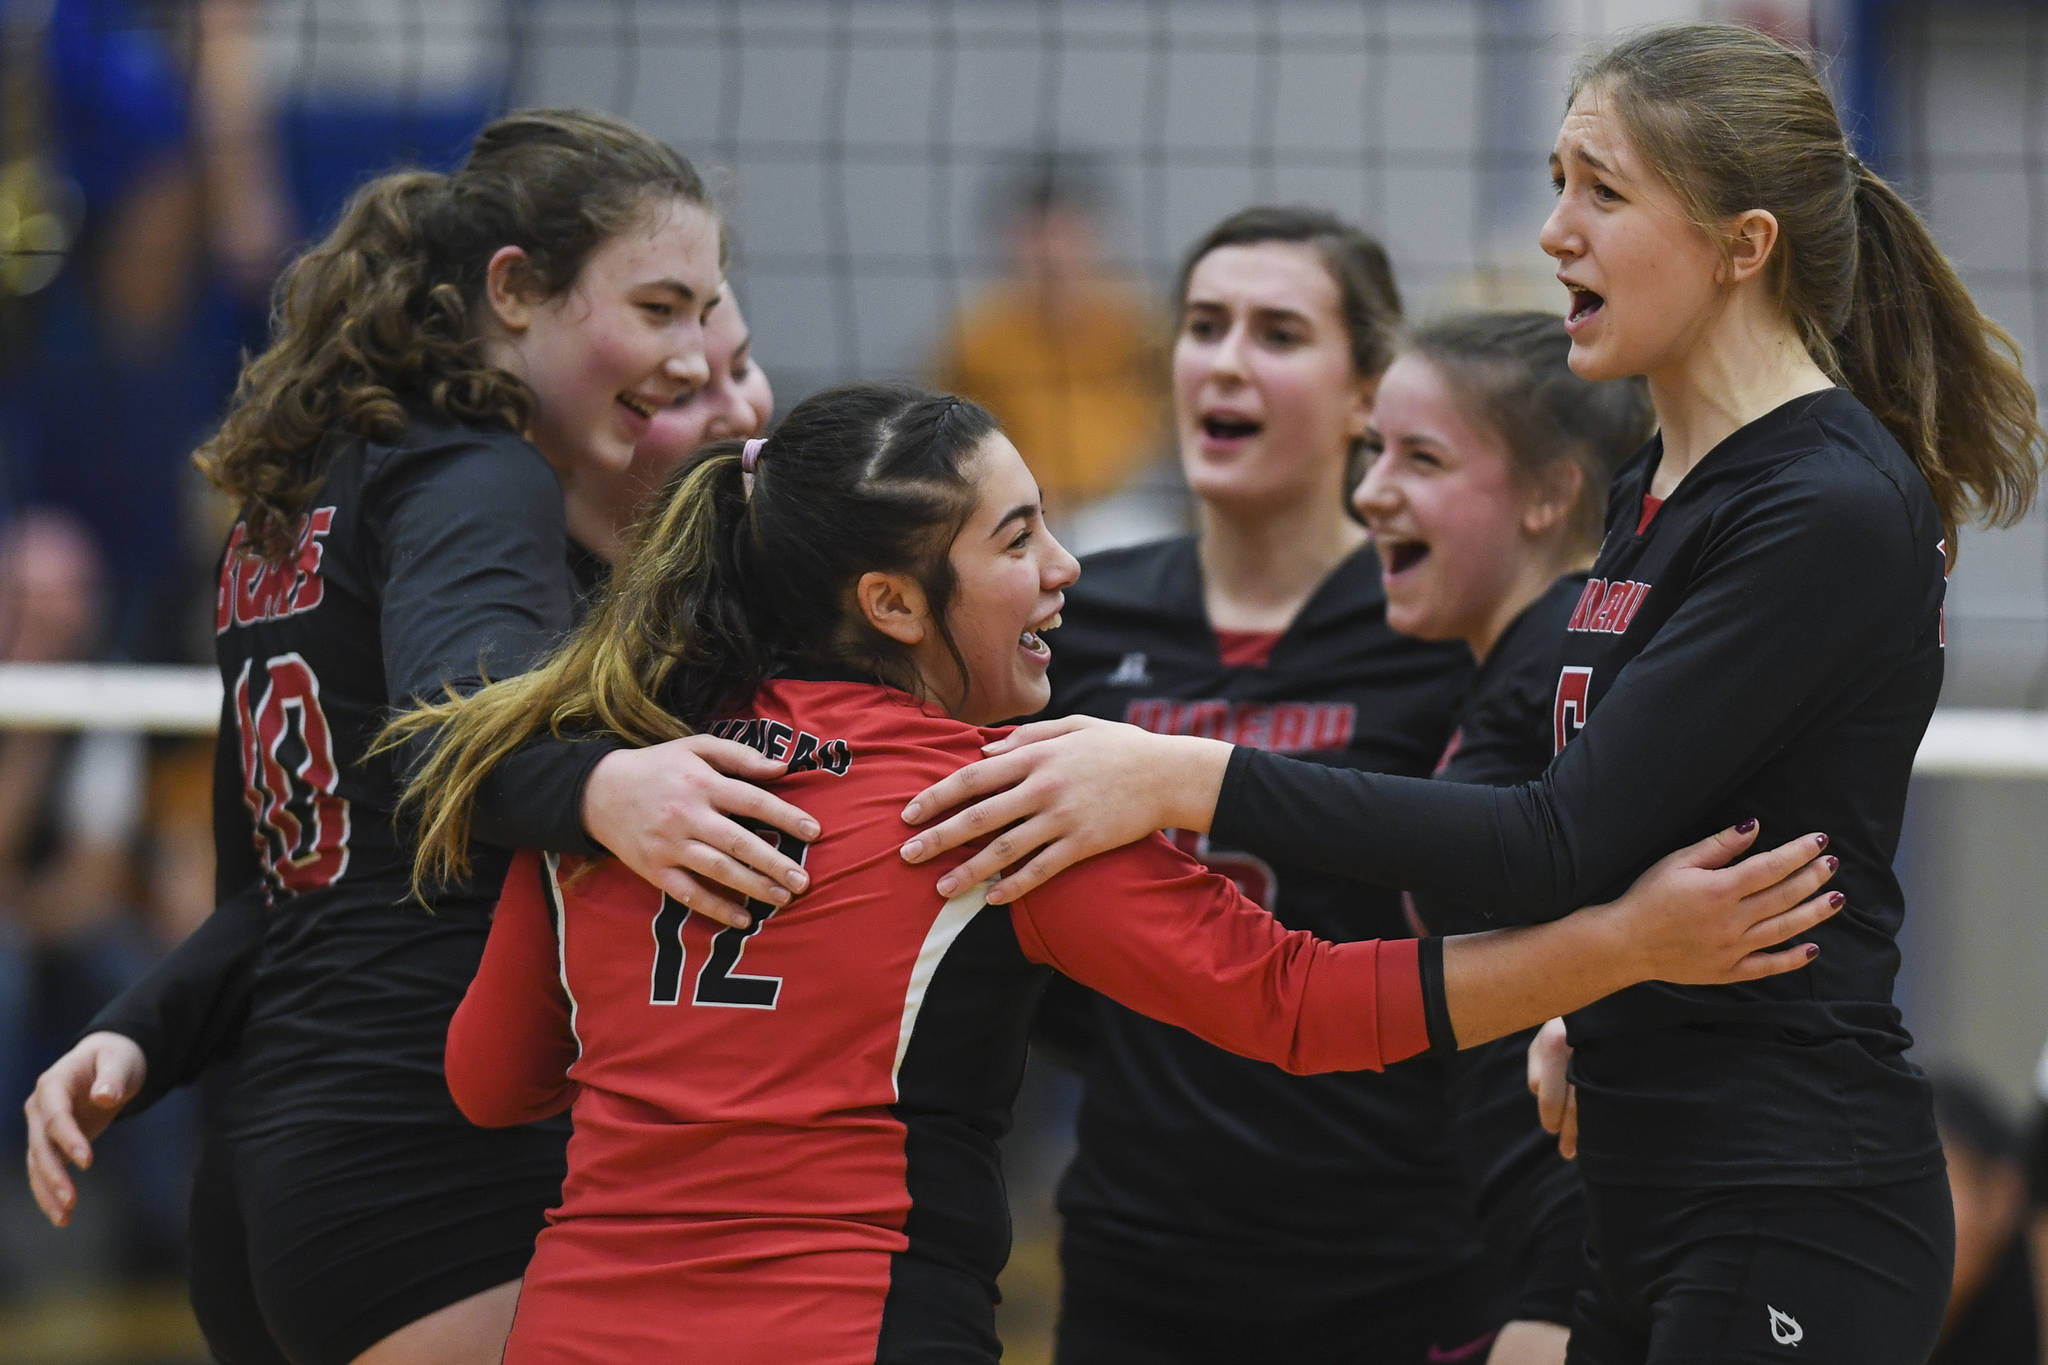 Juneau-Douglas’ Paige Adams, center, celebrates a point with her teammates against Thunder Mountain during the Region V Volleyball Tournament at Thunder Mountain High School on Friday, Nov. 8, 2019. JDHS won 25-22, 26-24, 25-20. (Michael Penn | Juneau Empire)